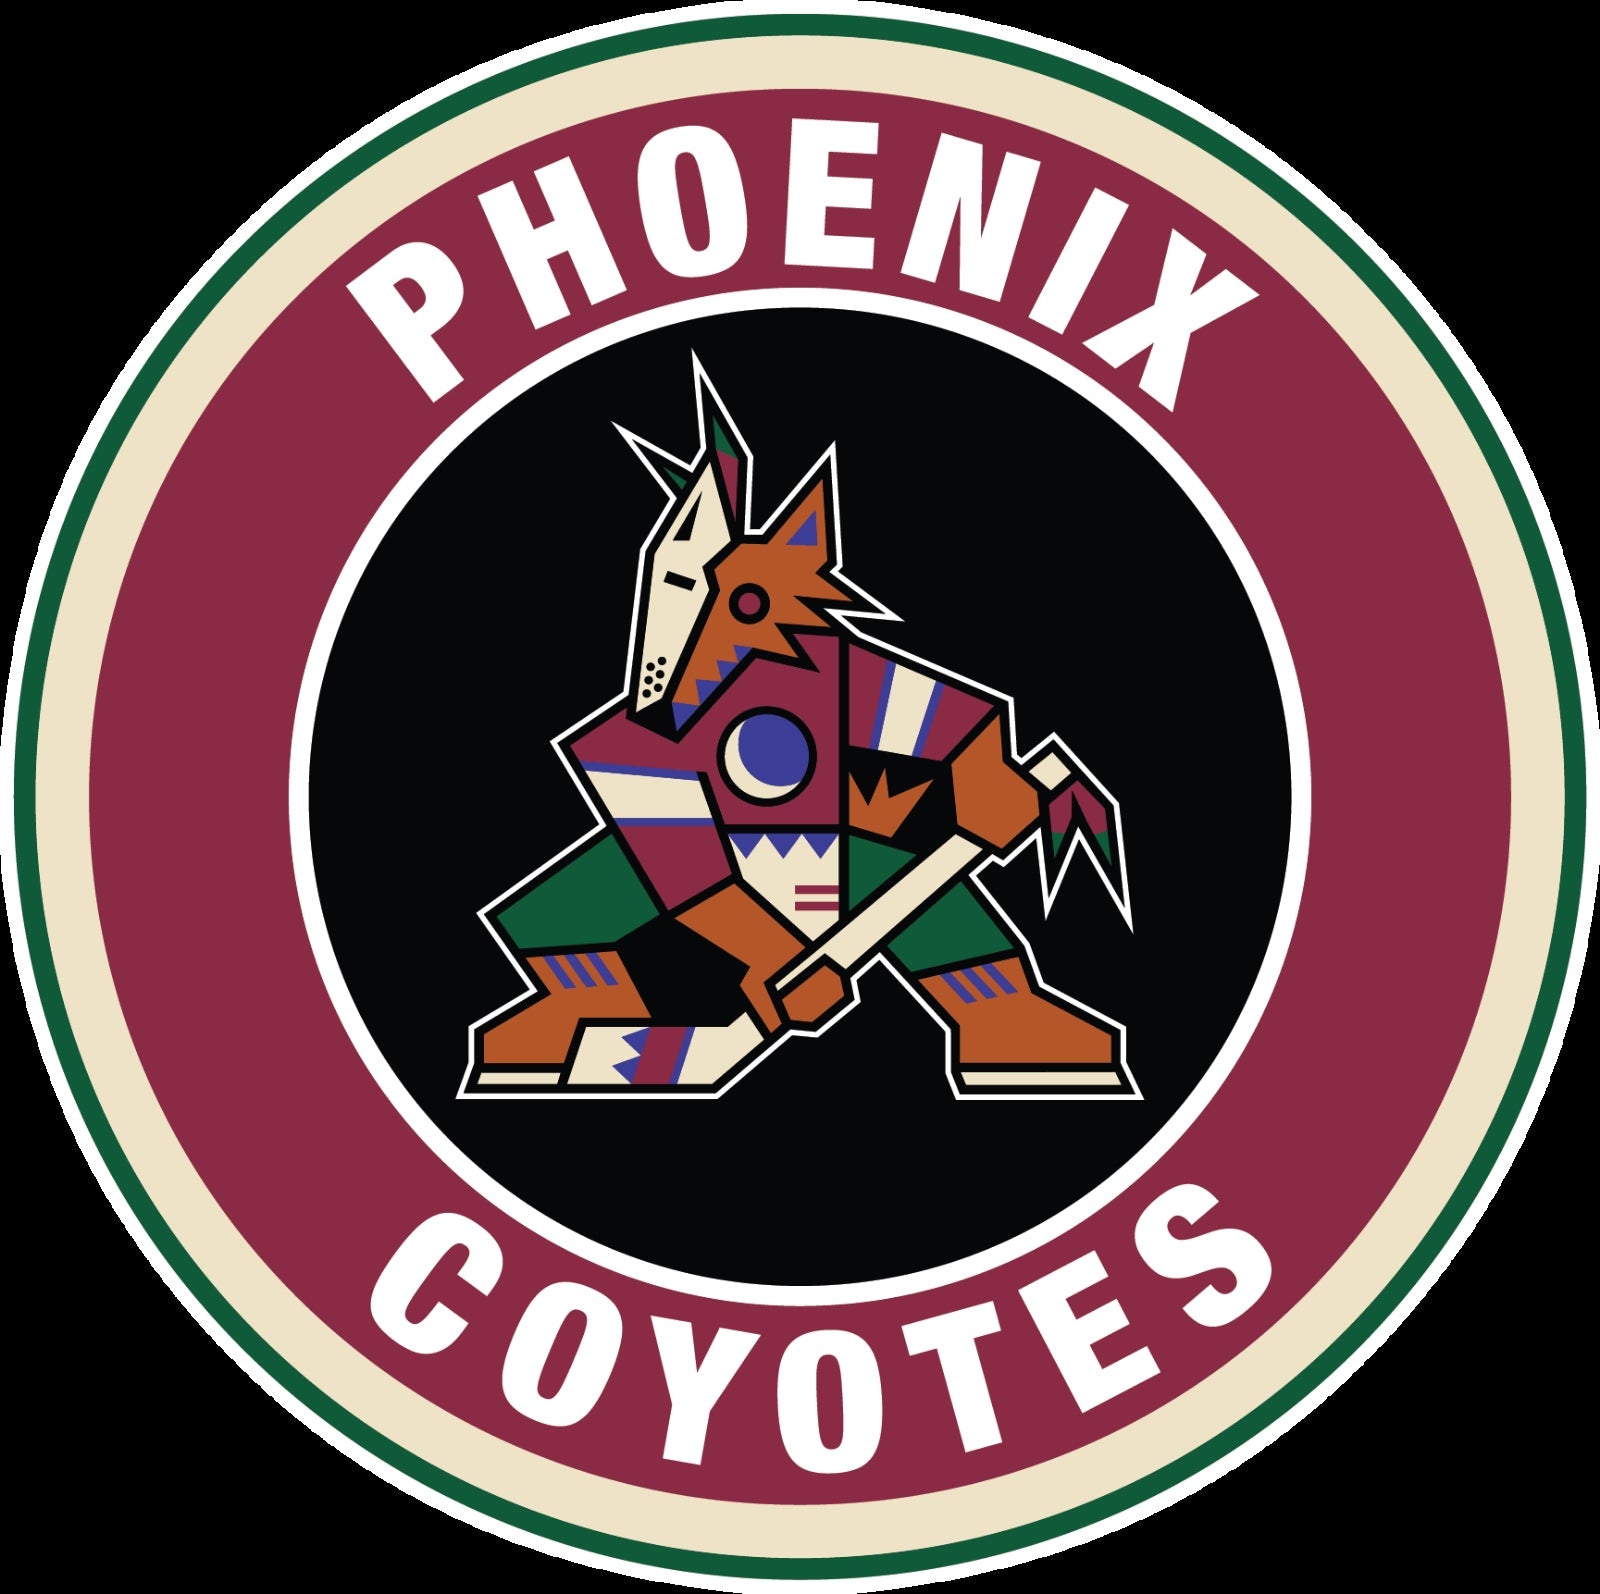 how to draw the phoenix coyotes logo